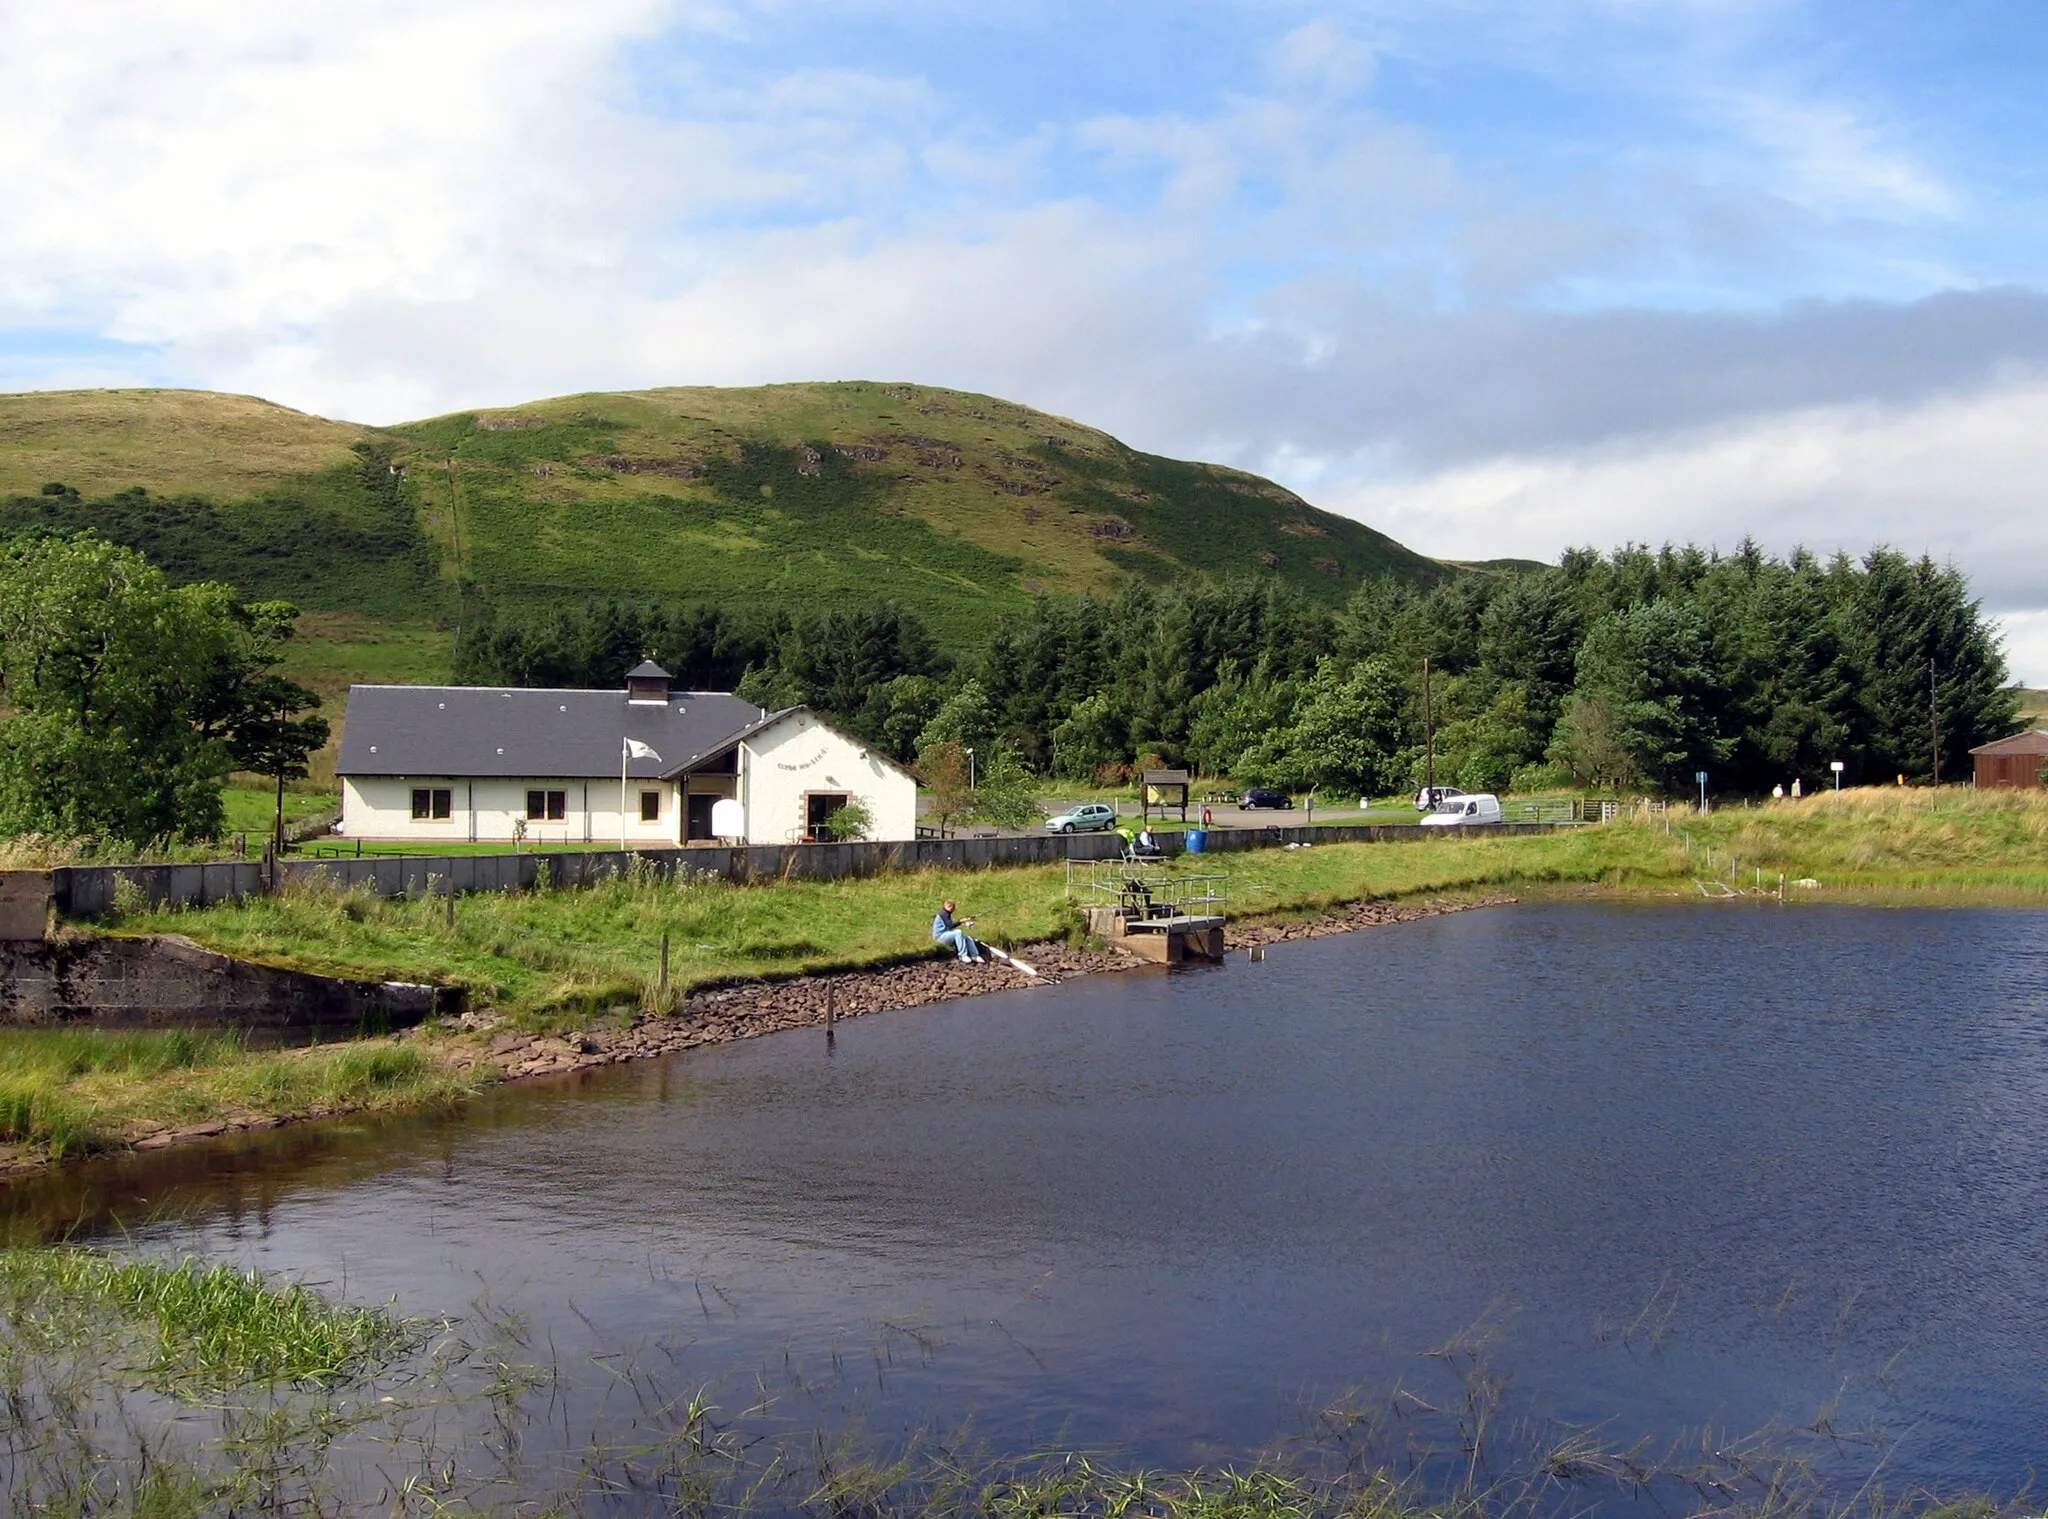 Photo showing: The Cornalees Bridge Centre next to the compensation reservoir at the outlet to Loch Thom provides nature study and outdoor access facilities including walks along The Cut which originally to the loch waters to the town of Greenock in Inverclyde, Scotland. Grid reference NS247721